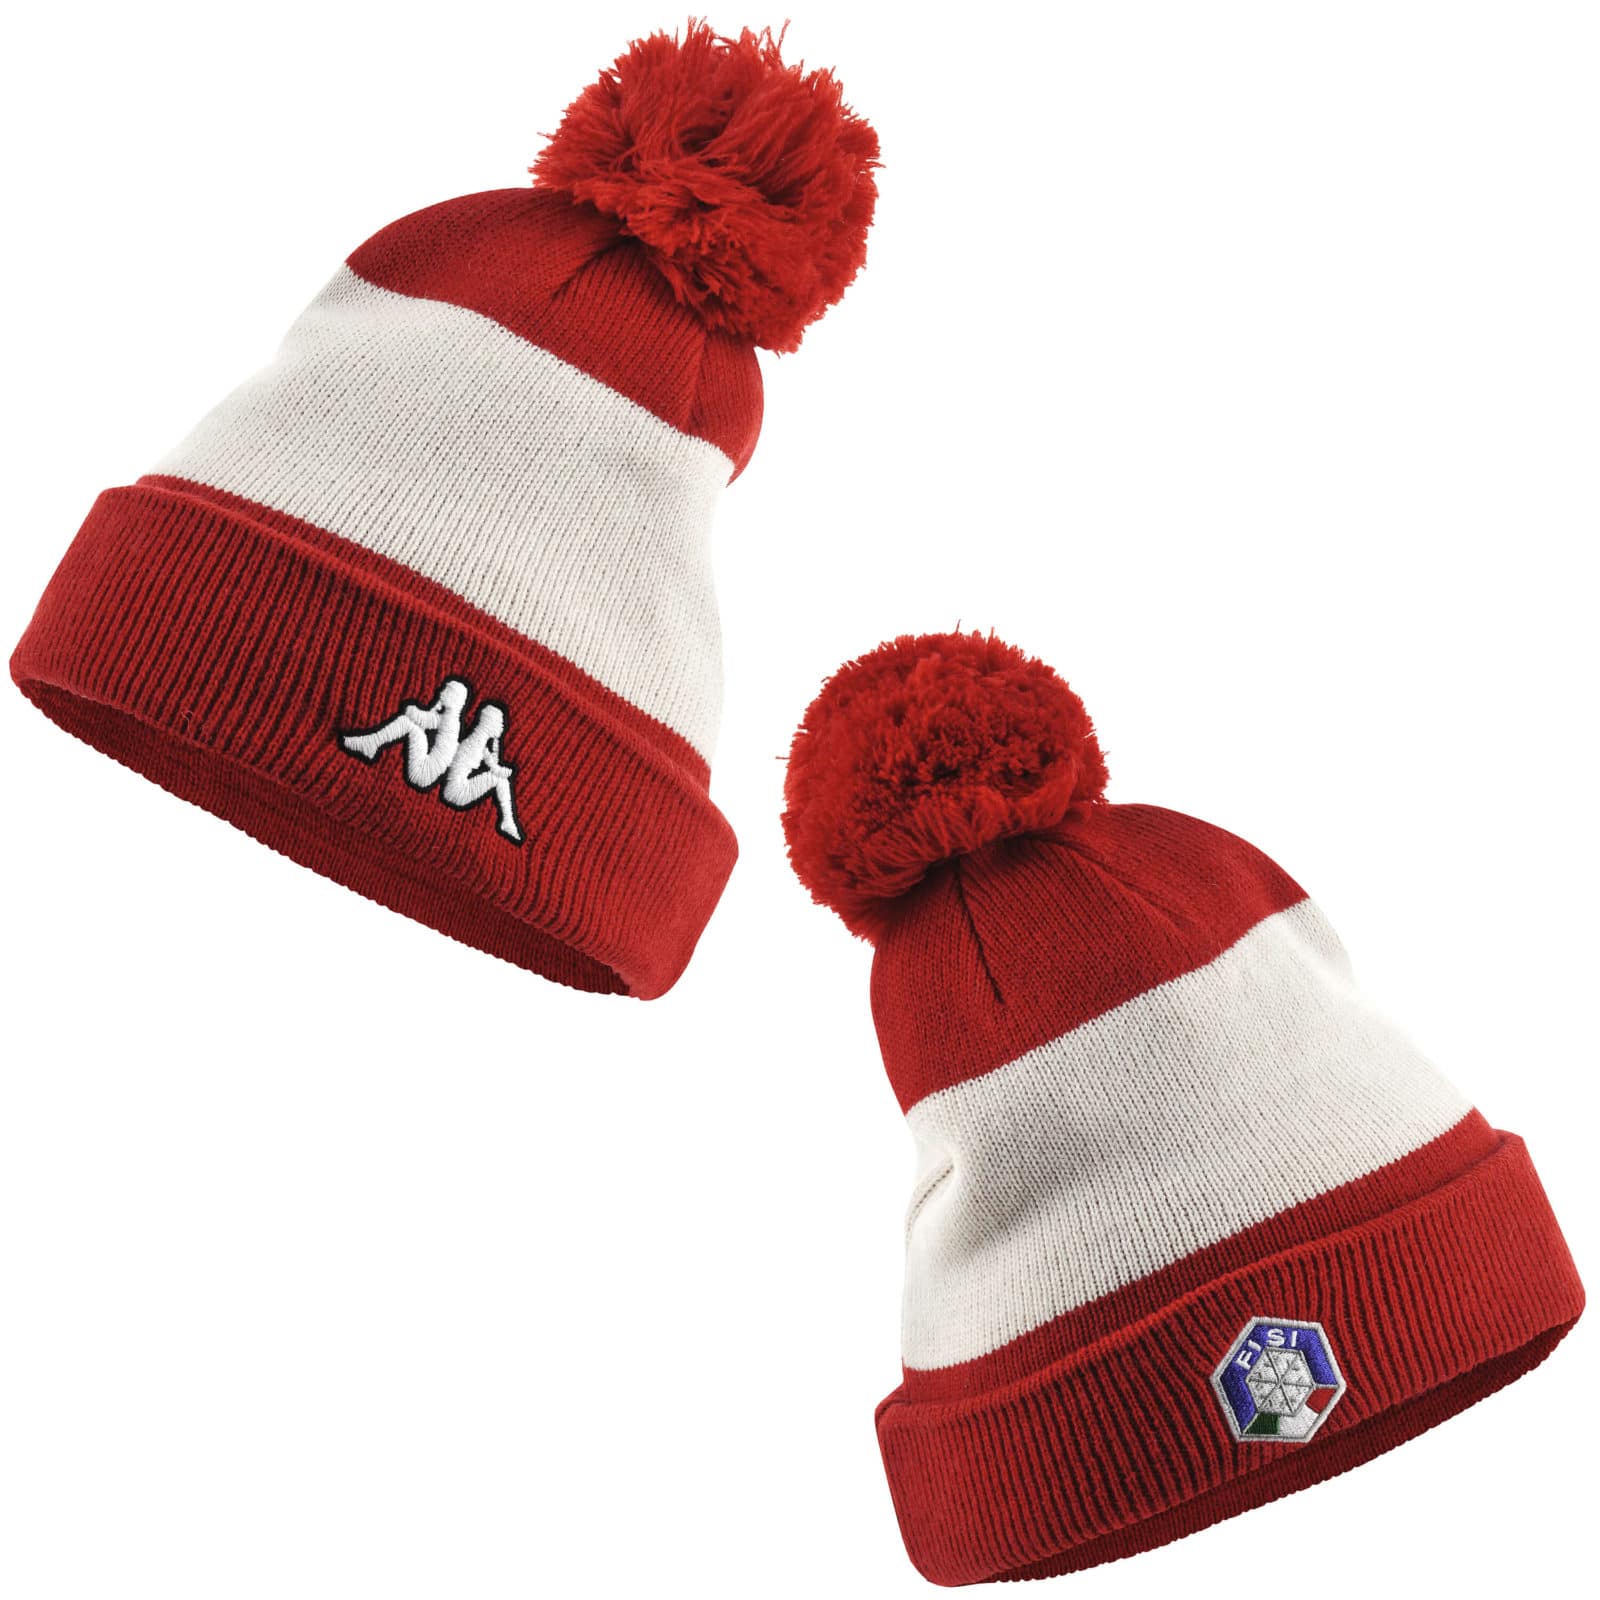 KAPPA 6CENTO FLOCK FISI Knit Hat - Red